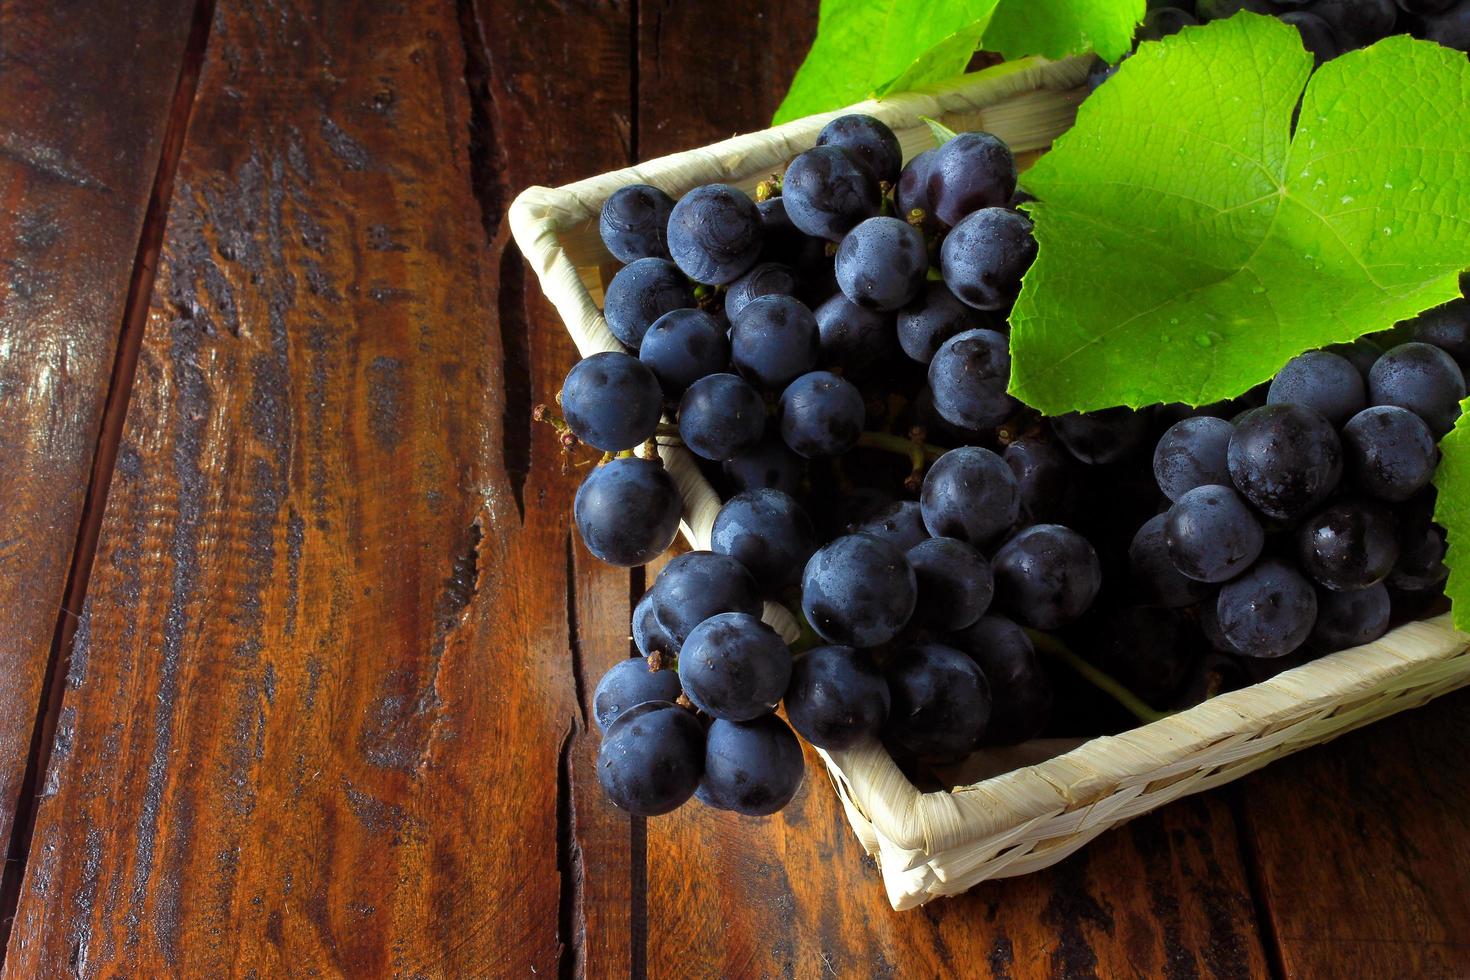 bunches of grapes, inside bamboo fiber basket on wooden table photo